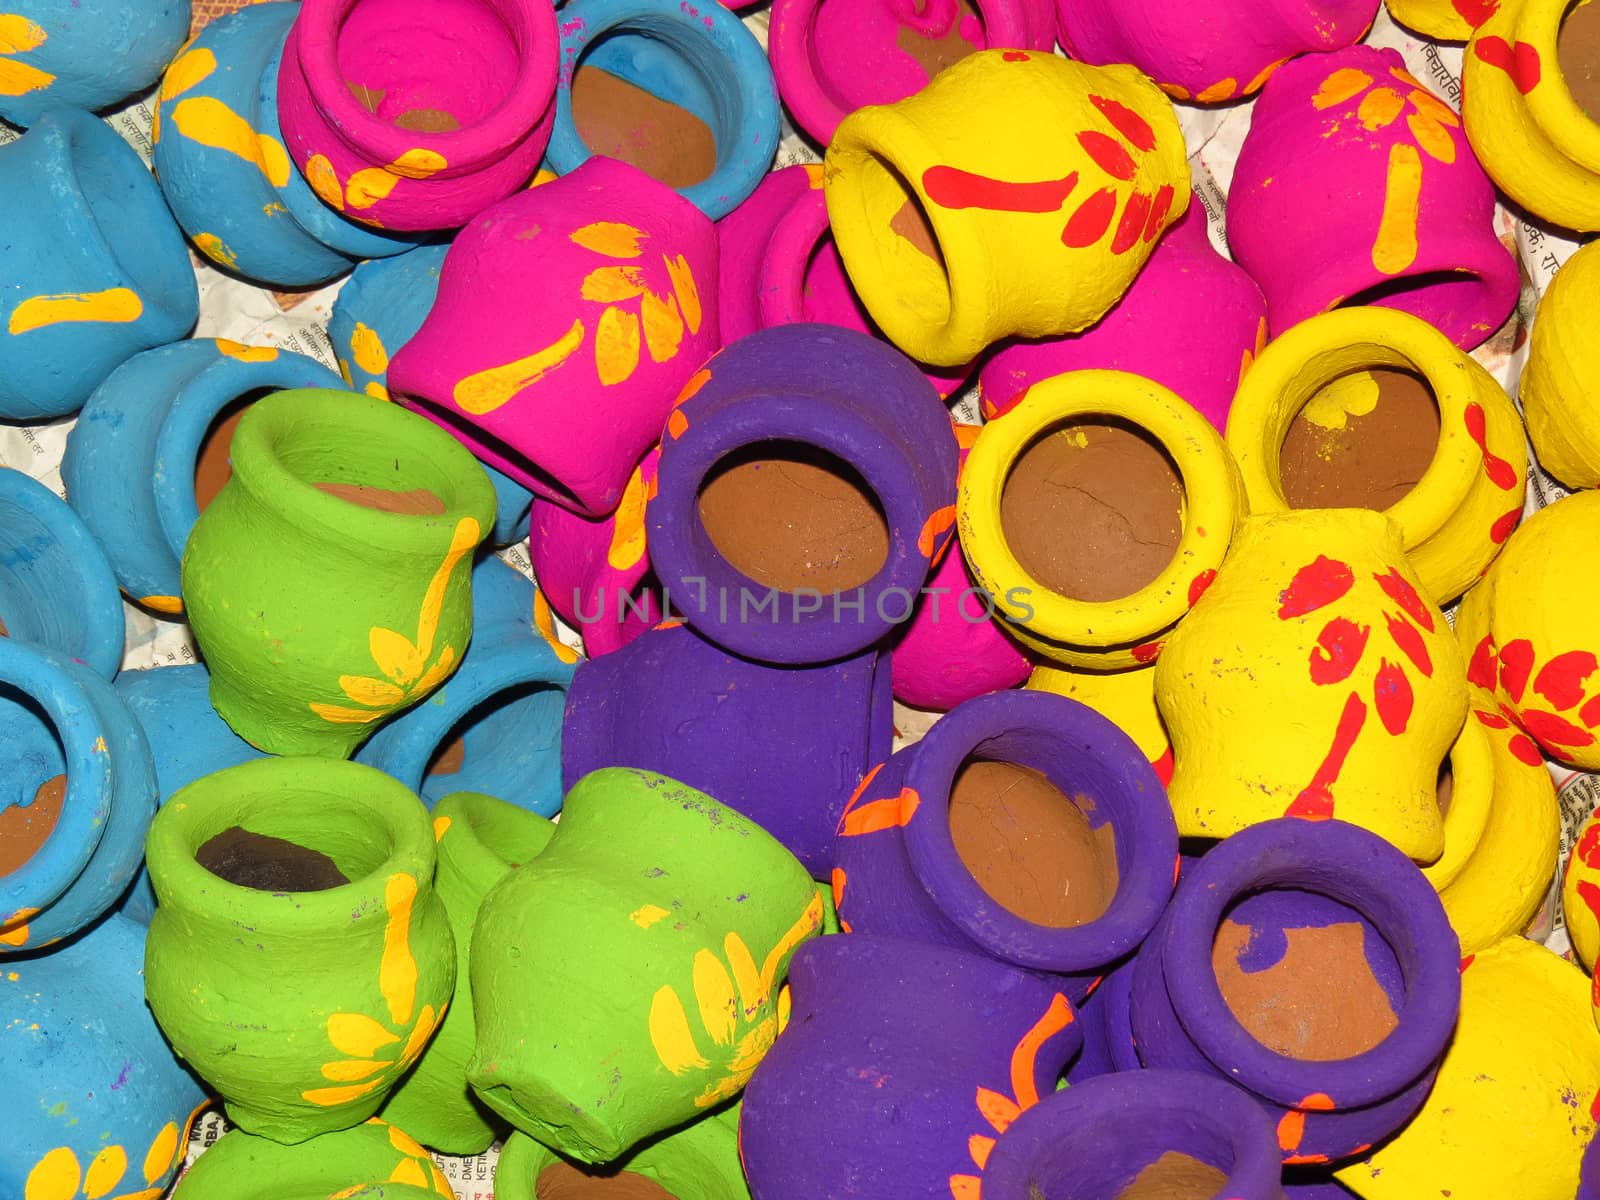 Colorful pots used traditionally for Diwali festival in India during Laxmipujan.                               